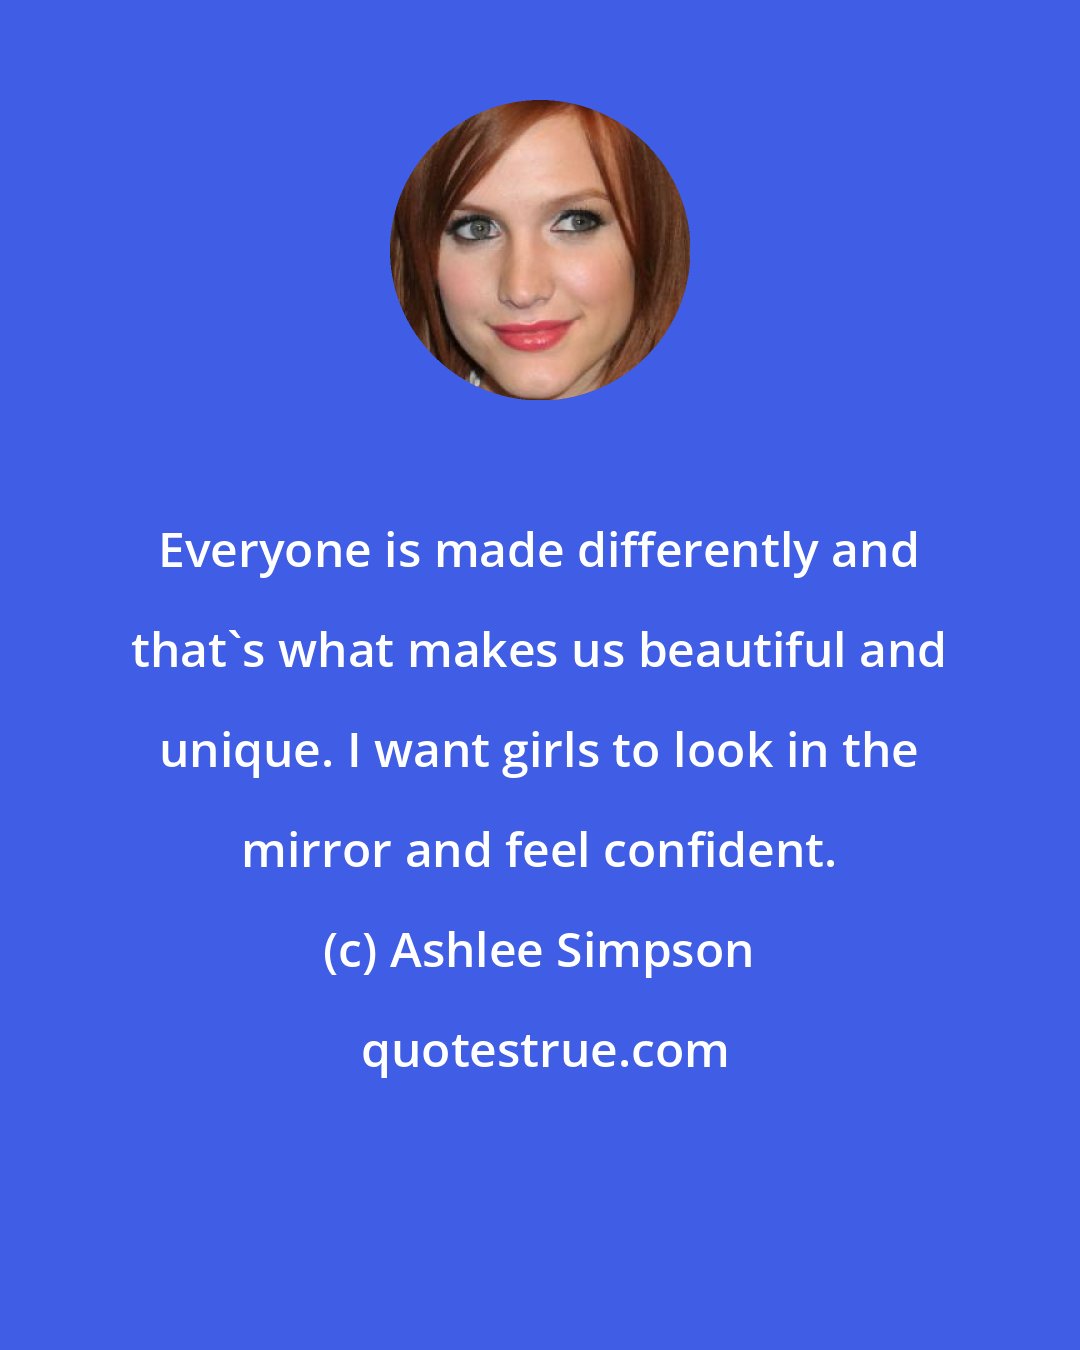 Ashlee Simpson: Everyone is made differently and that's what makes us beautiful and unique. I want girls to look in the mirror and feel confident.